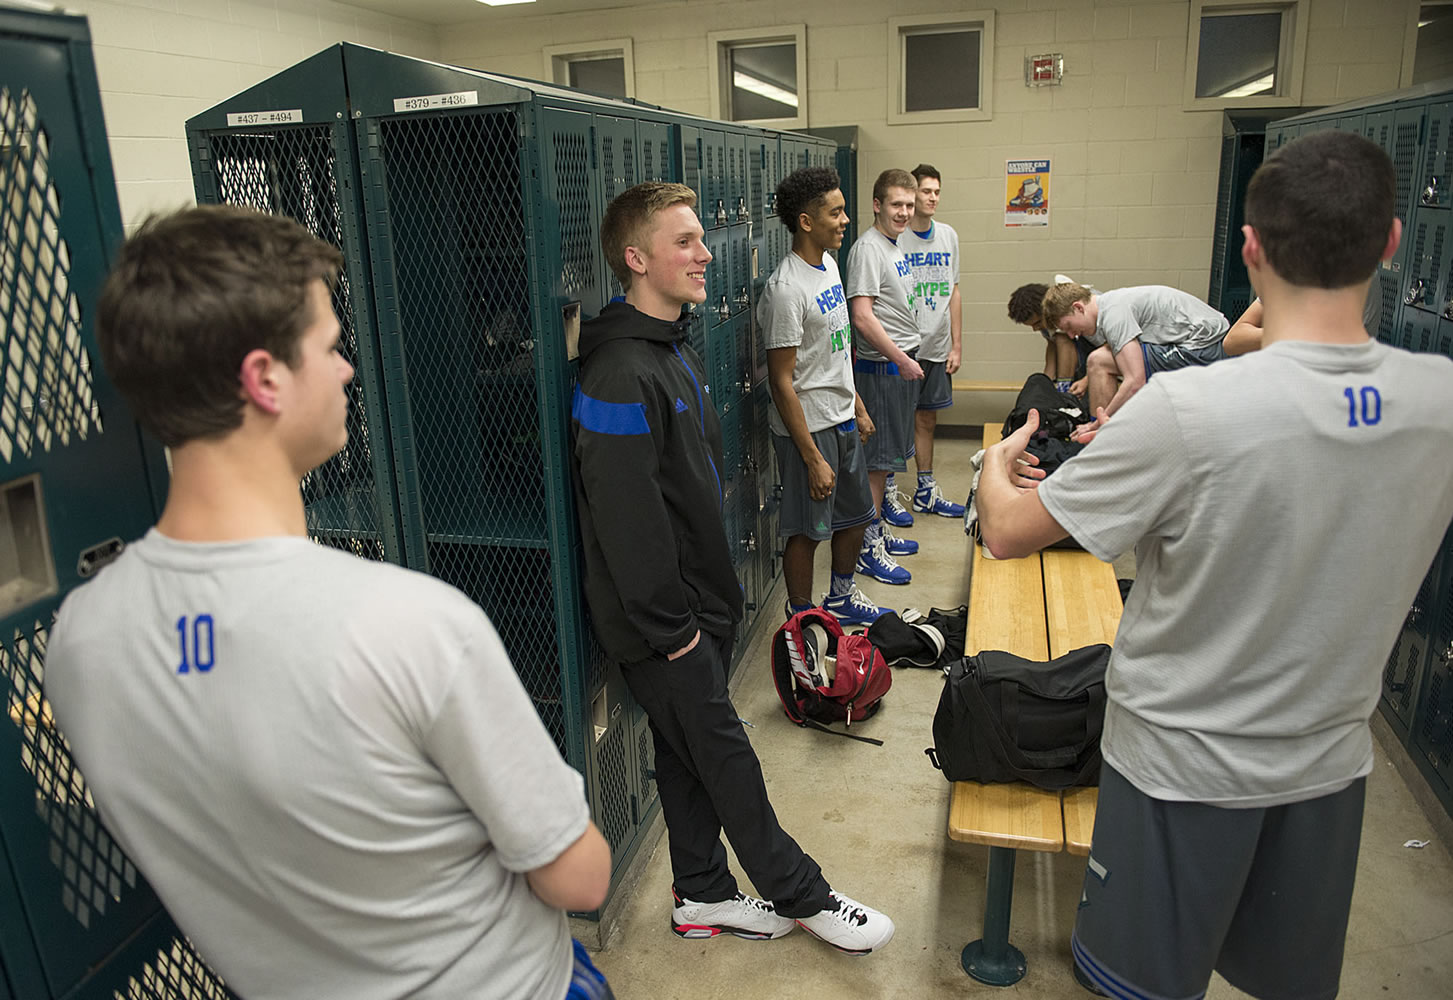 Mountain View senior Jake Ryan, center in black, chats with teammates in the locker room before the game Tuesday night, Dec. 15, 2015 at Heritage High School.